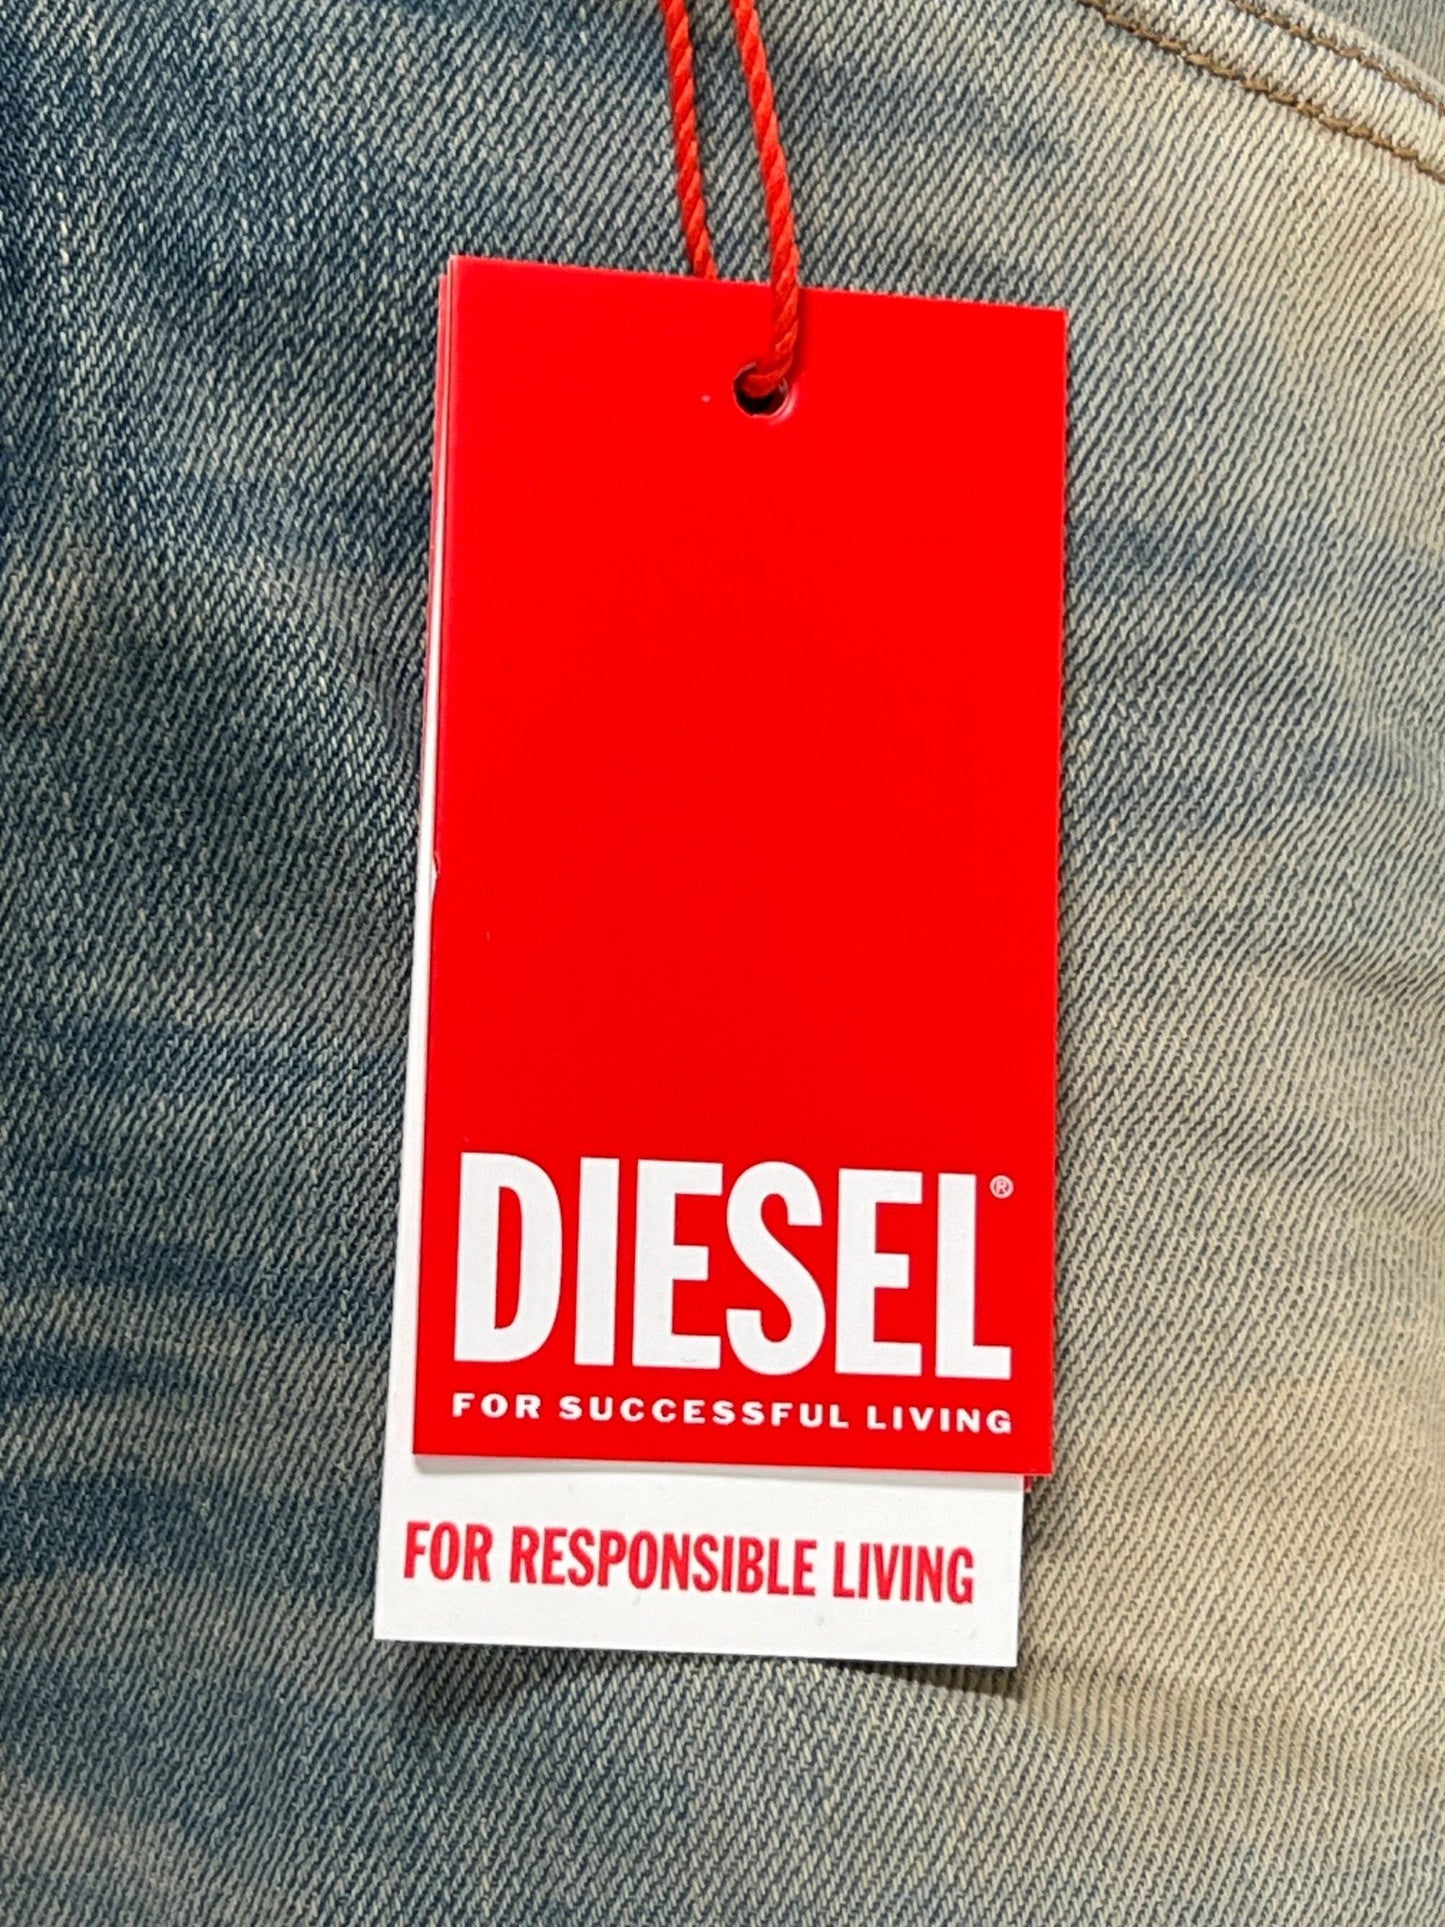 A medium blue wash DIESEL bootcut jeans clothing tag with the slogan "for successful living" followed by "for responsible living.